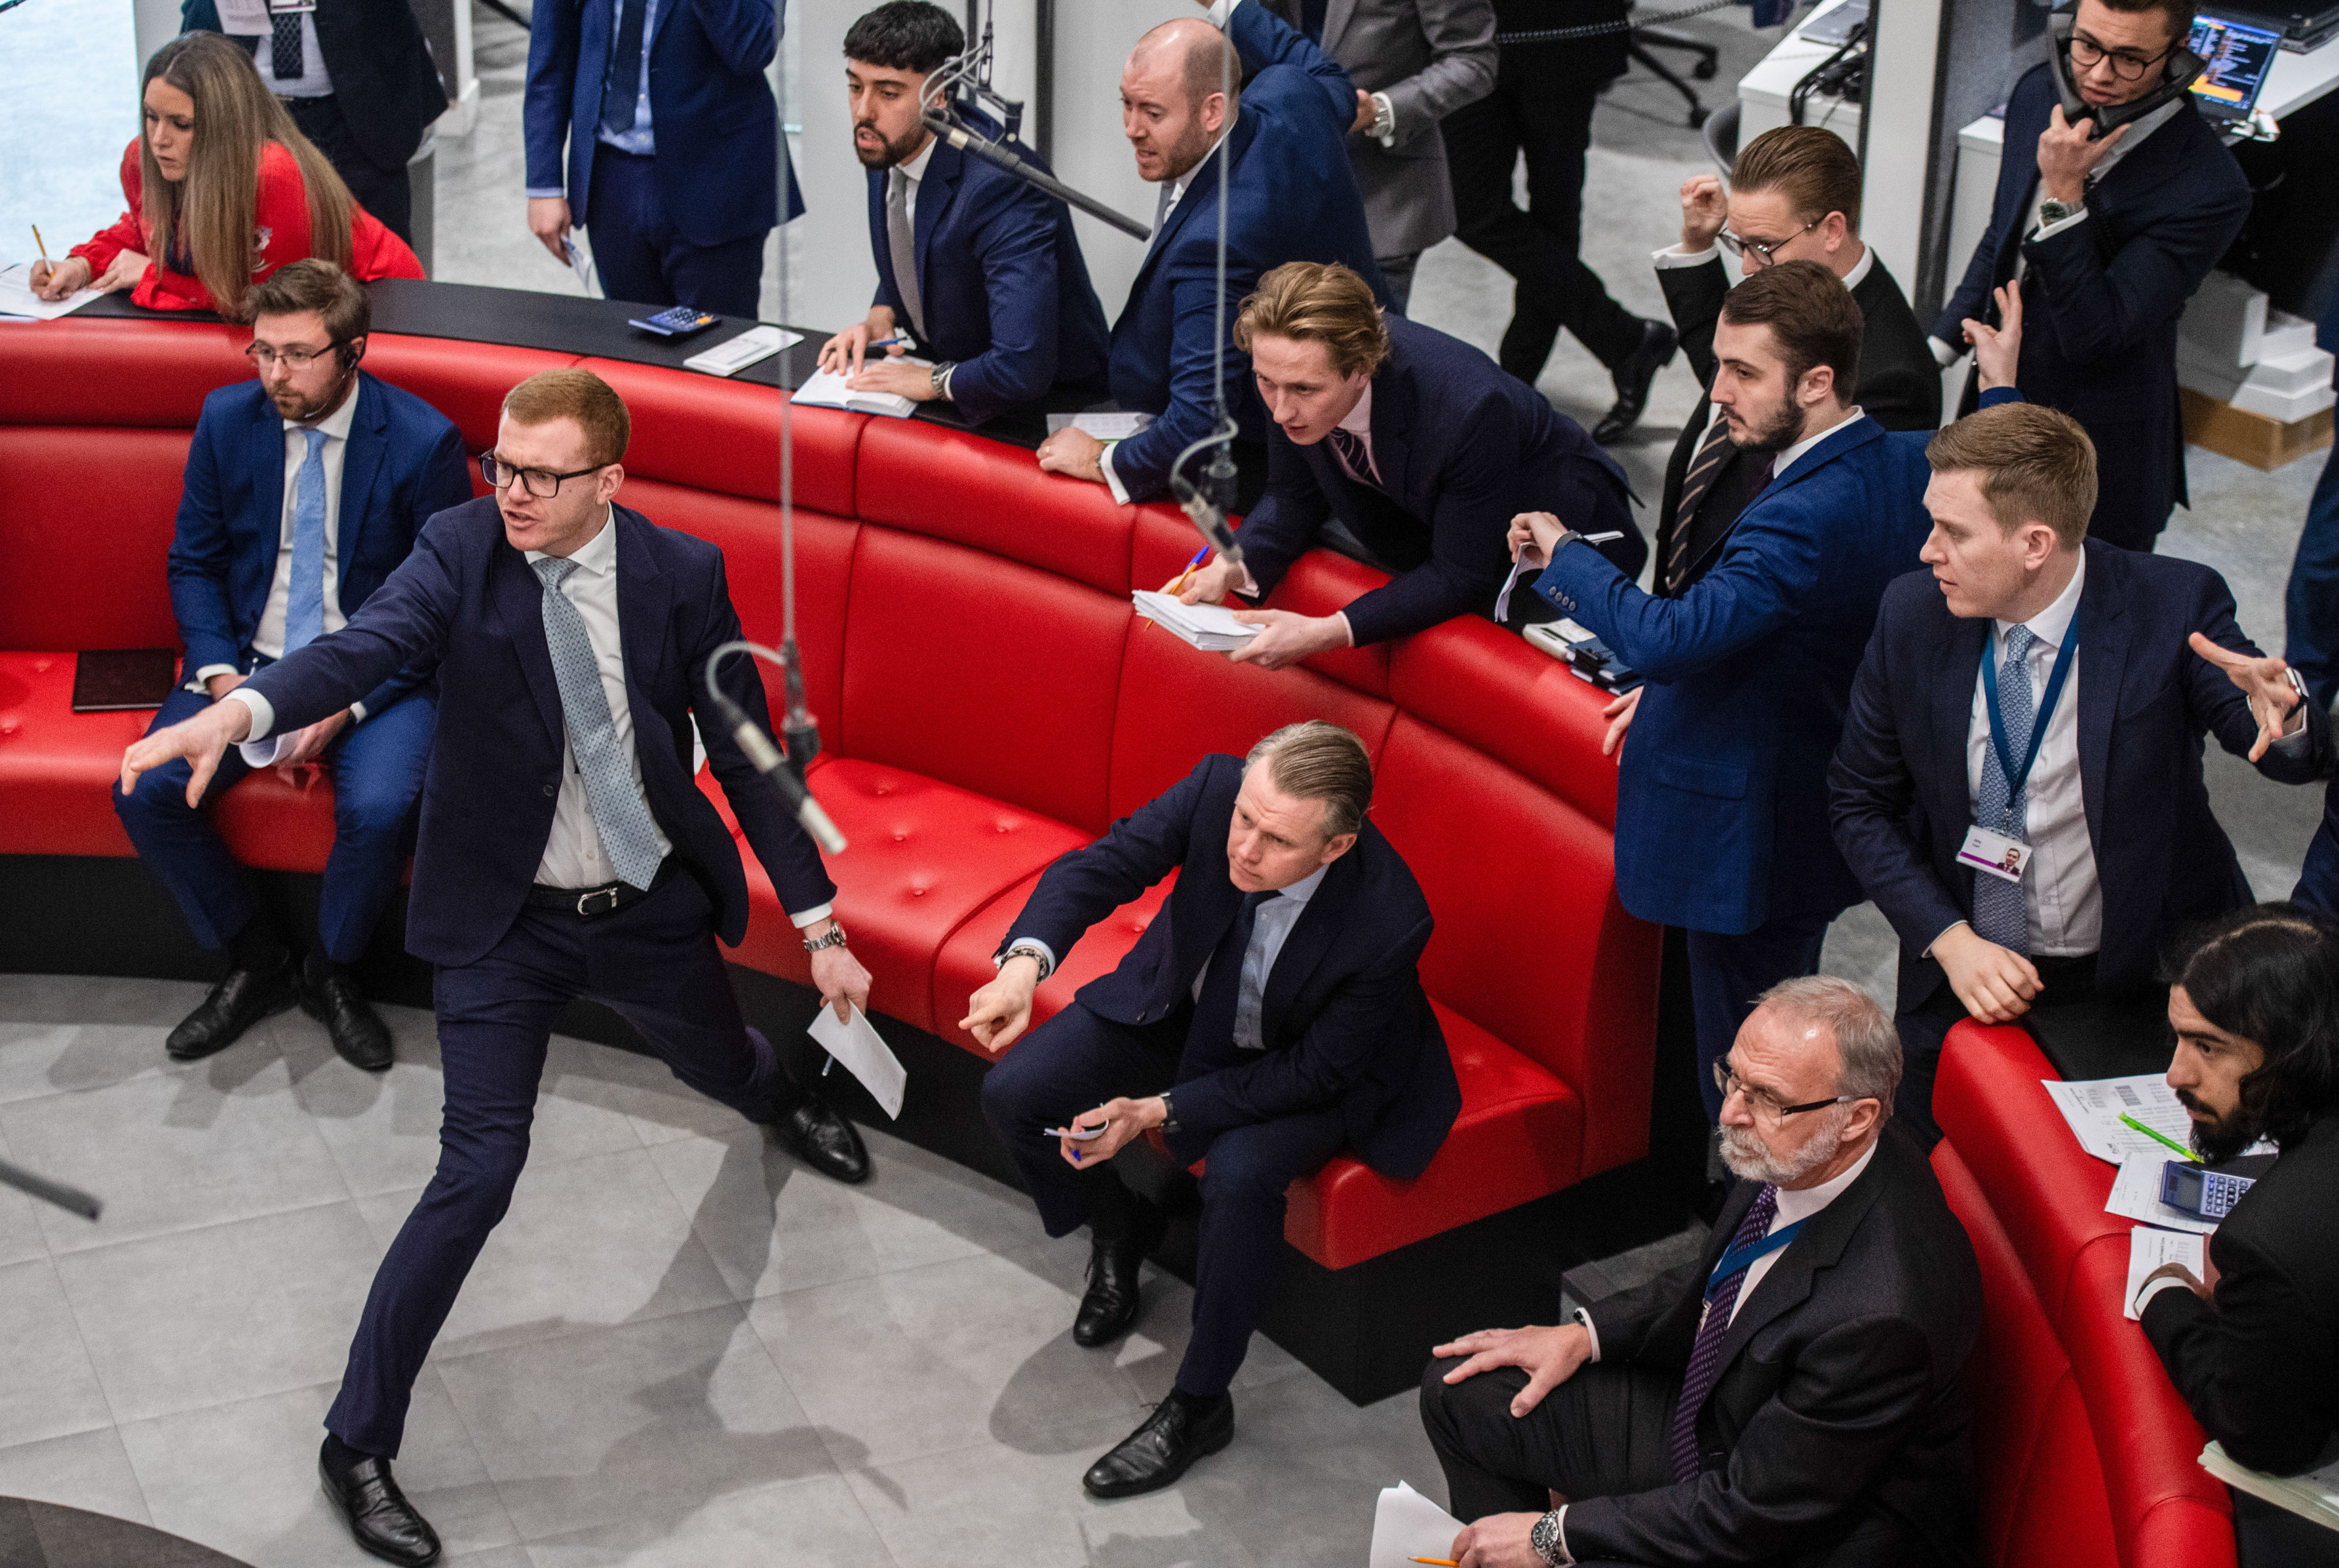 Traders, brokers and clerks on the trading floor of the open outcry pit at the London Metal Exchange in February 2022. Photo: Bloomberg